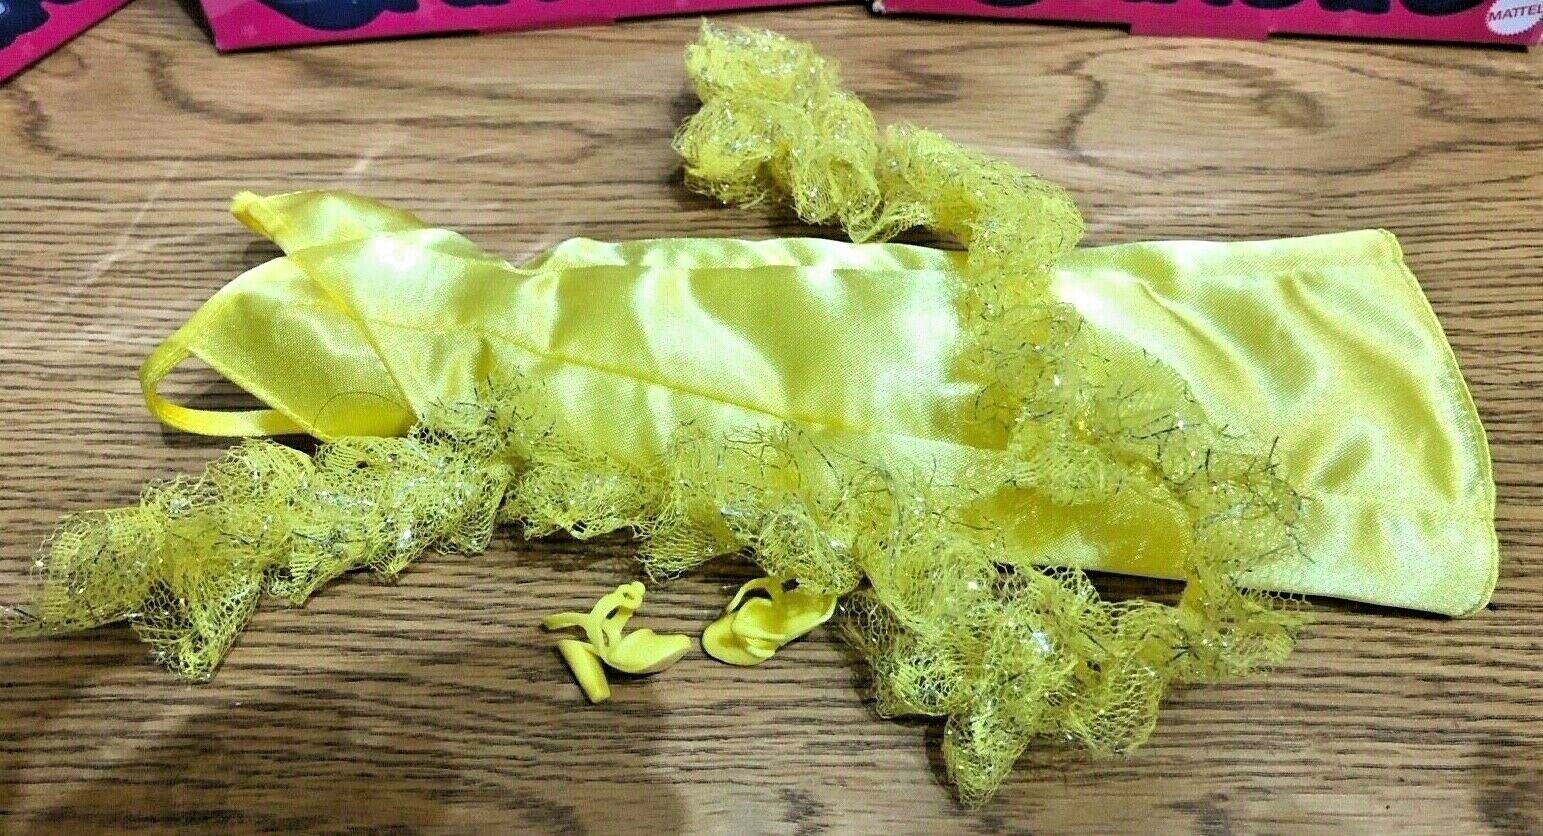 Vintage Repro Superstar Christie Barbie Fashion Yellow Gown & Boa With Shoes